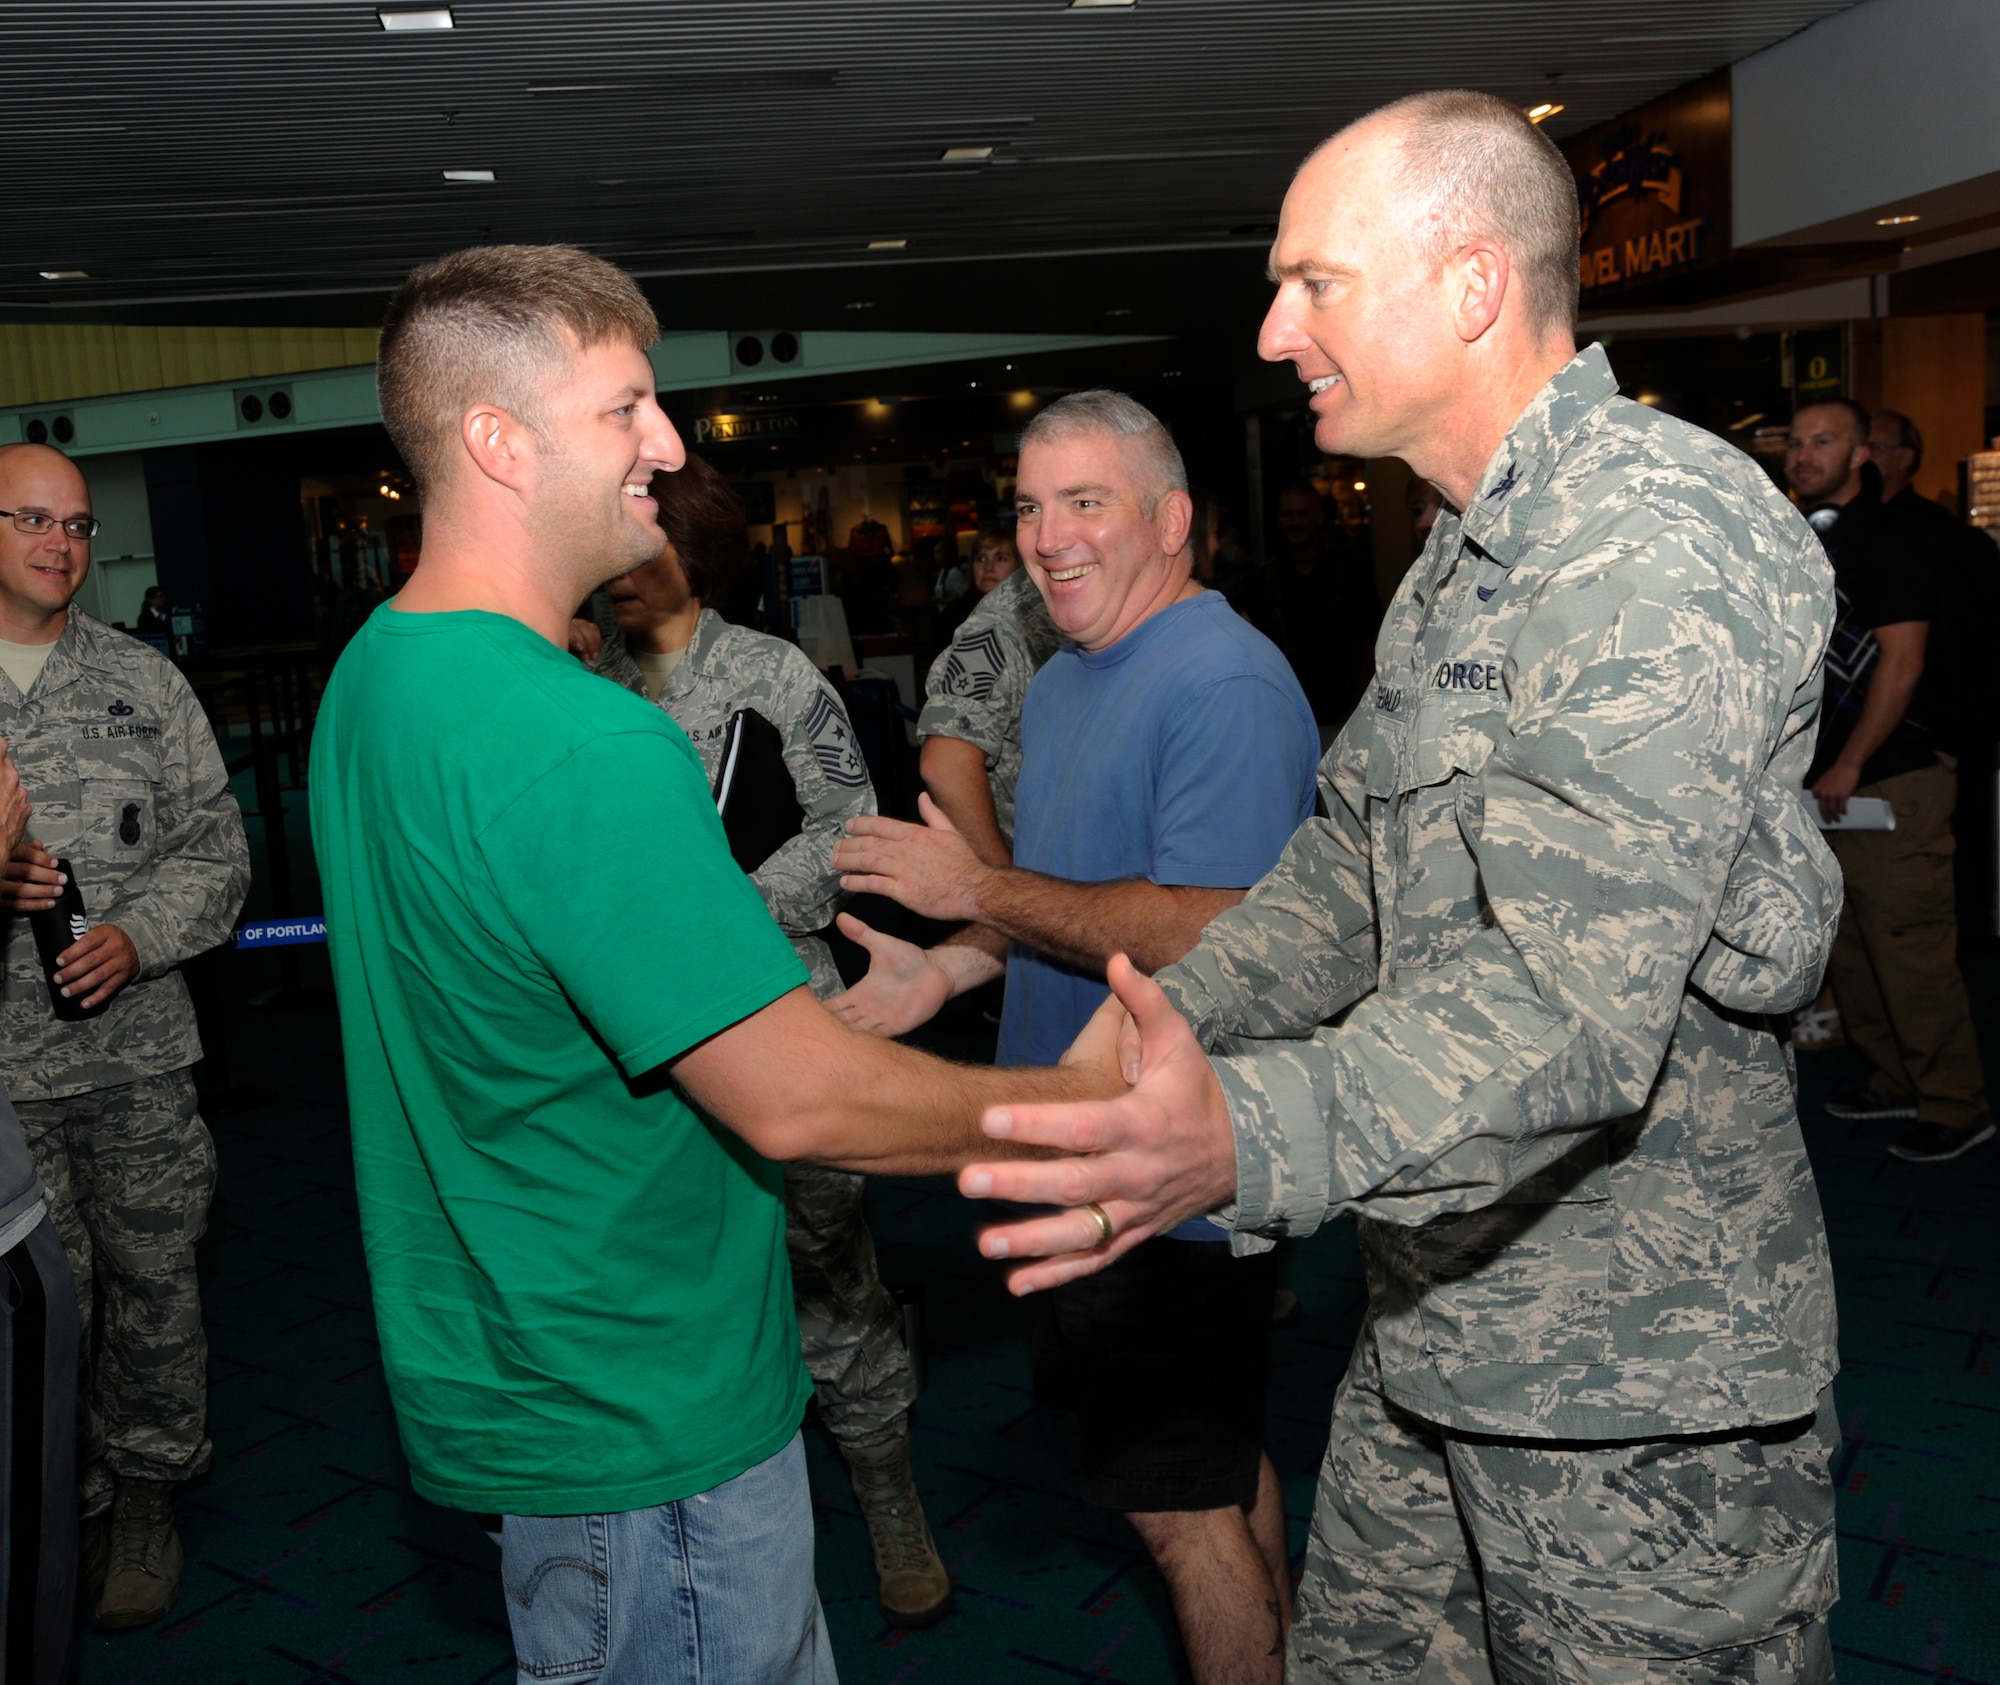 Members of the 142nd Fighter Wing Security Forces Squadron are welcomed back to Oregon at the Portland International Airport after their recent deployment, Aug. 8, 2013. A total of 26 Airmen from the 142nd Fighter Wing spent six months in Qatar in support of Operation Enduring Freedom. (Air National Guard photo by Tech. Sgt. John Hughel, 142nd Fighter Wing Public Affairs/released)